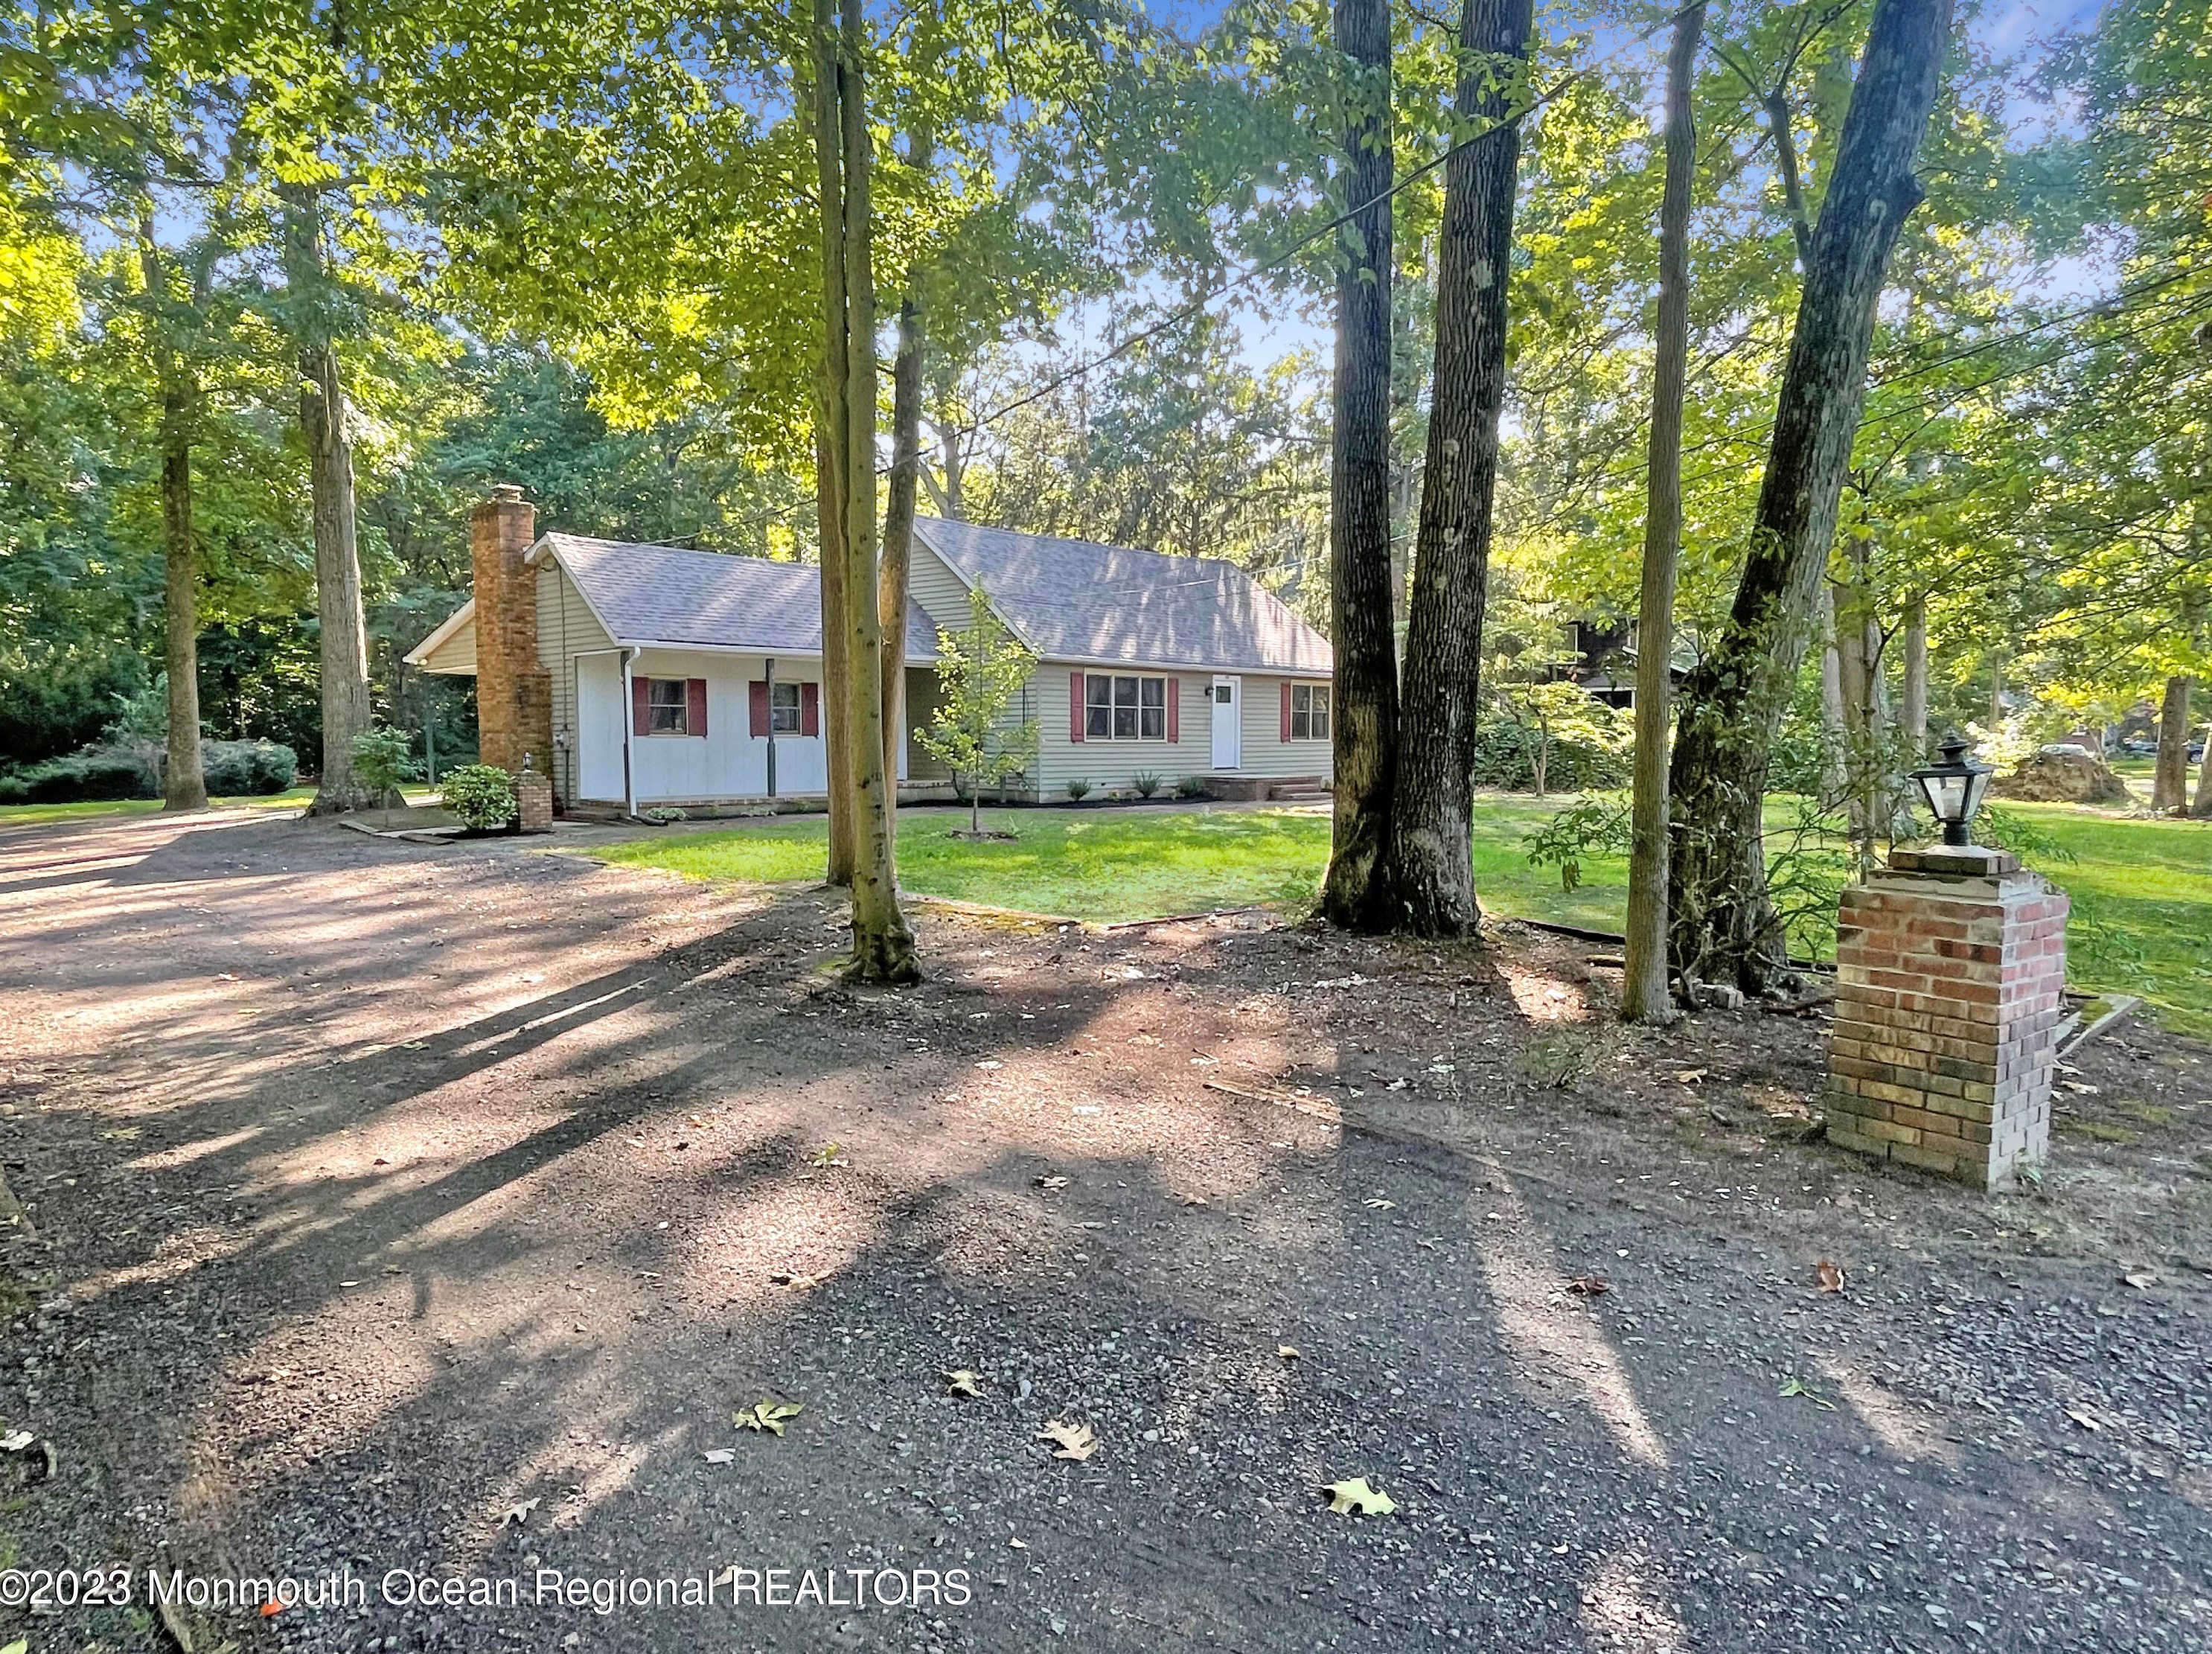 43 Brynmore Rd, Plumsted Township, NJ 08533